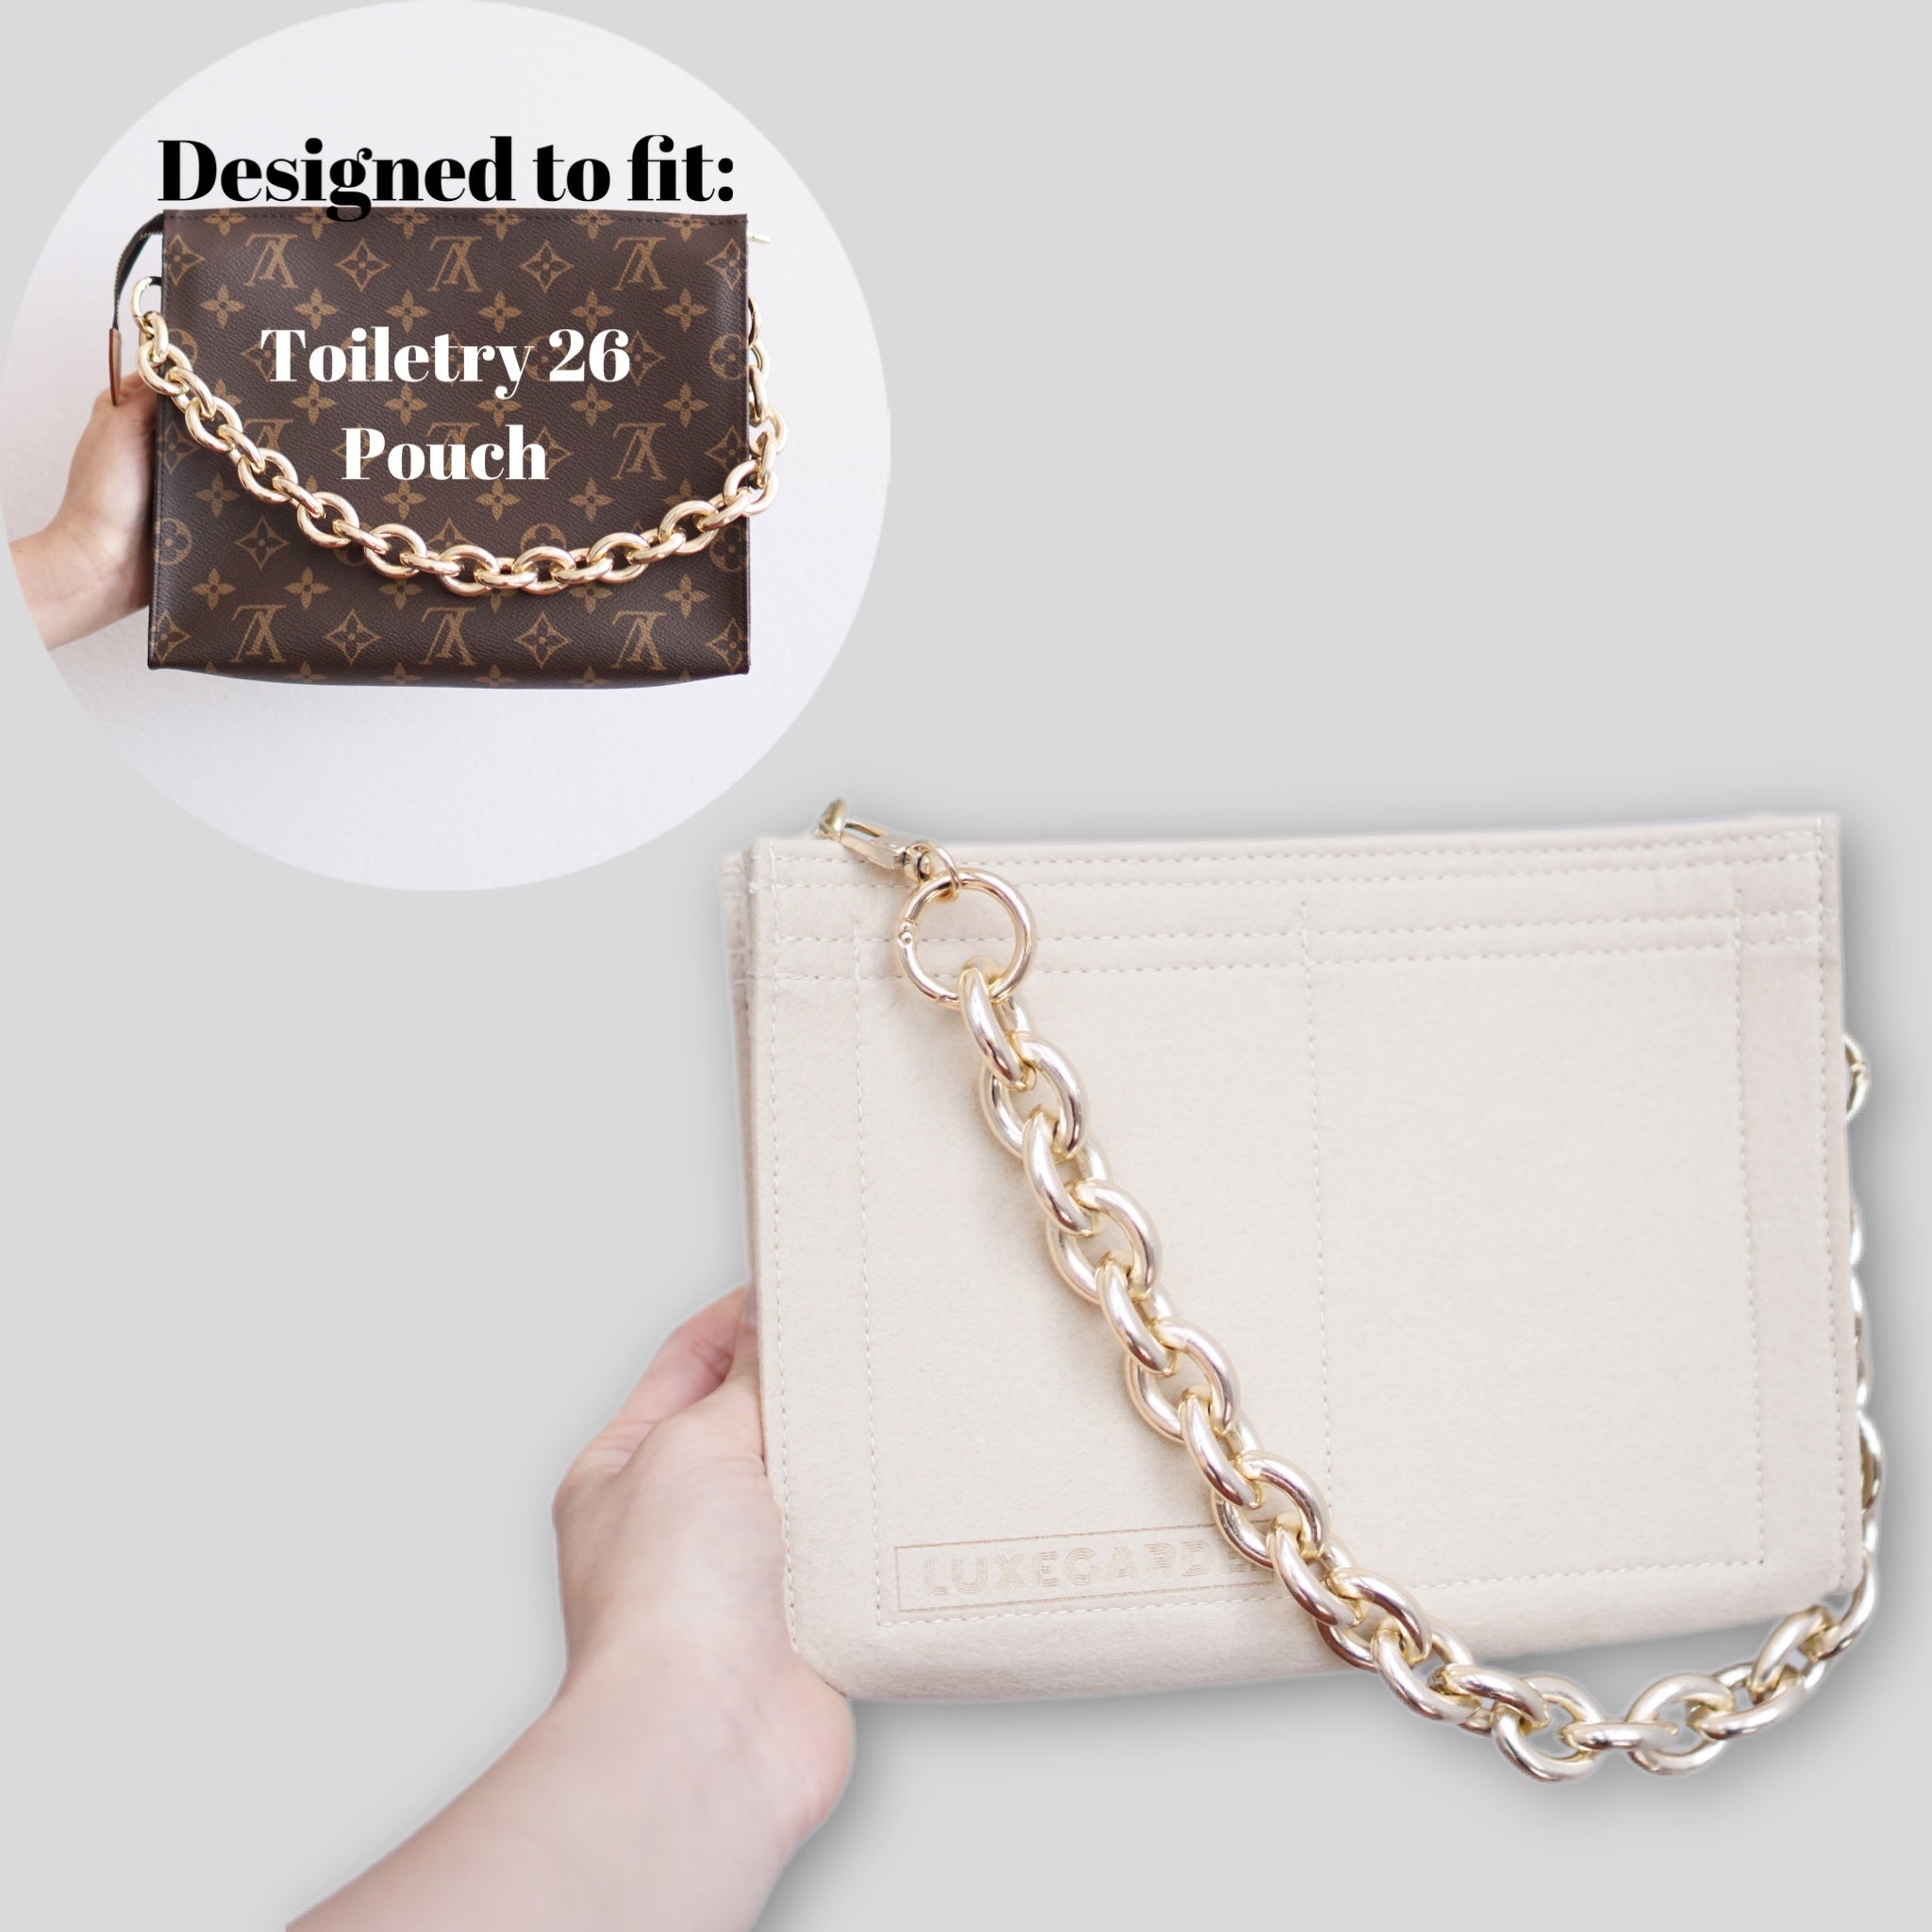 Toiletry Pouch 26 Crossbody Conversion Kit with Chunky Oval Gold Chain  Strap – Luxegarde